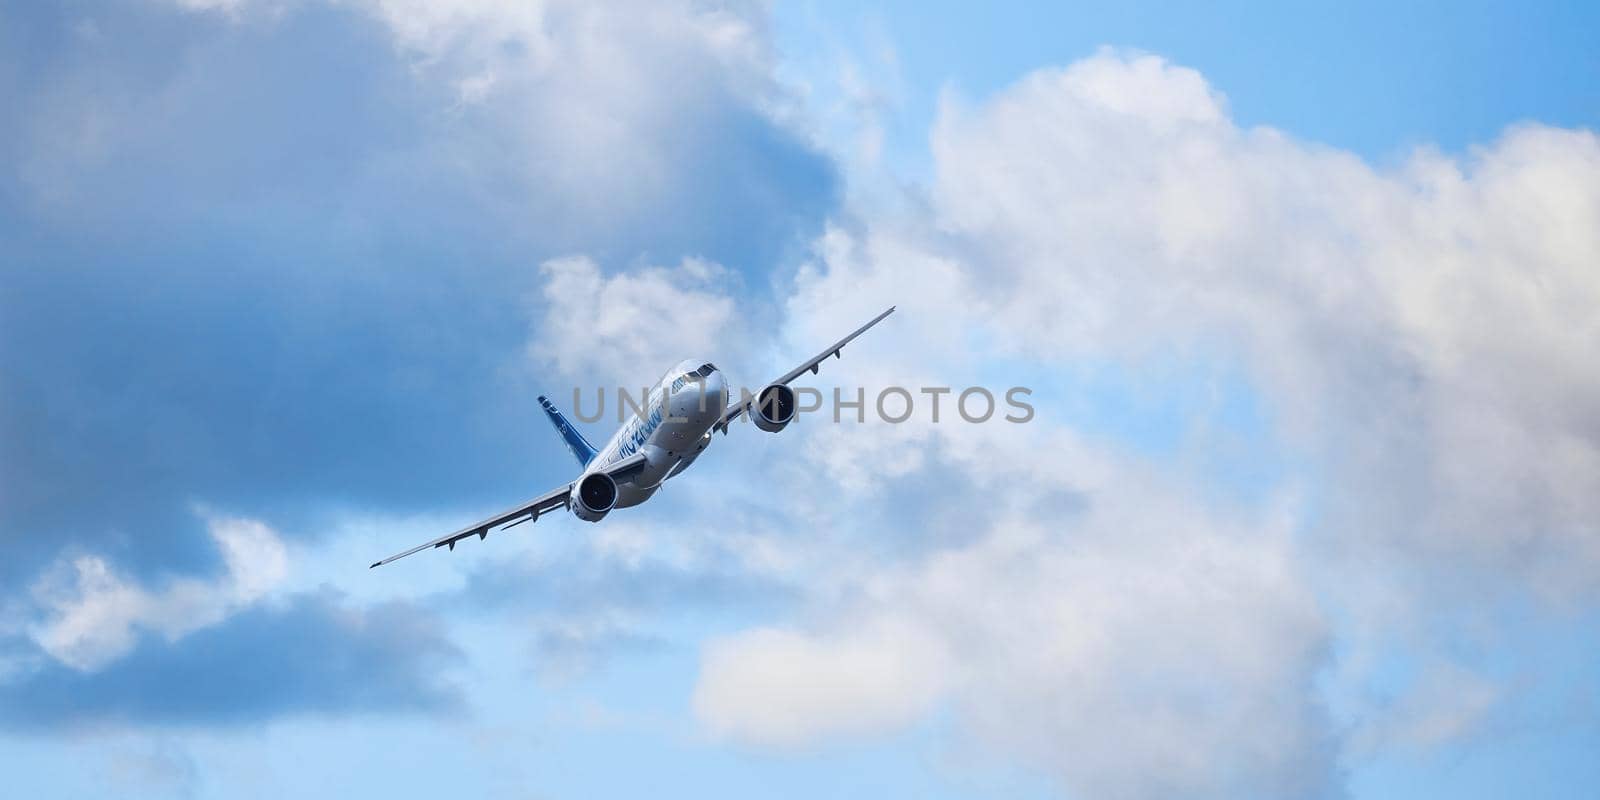 New Russian passenger aircraft MS-21-300 flying prototype of a new Russian civil airliner during test flights on MAKS 2019 airshow. ZHUKOVSKY, RUSSIA, AUGUST 29, 2019.